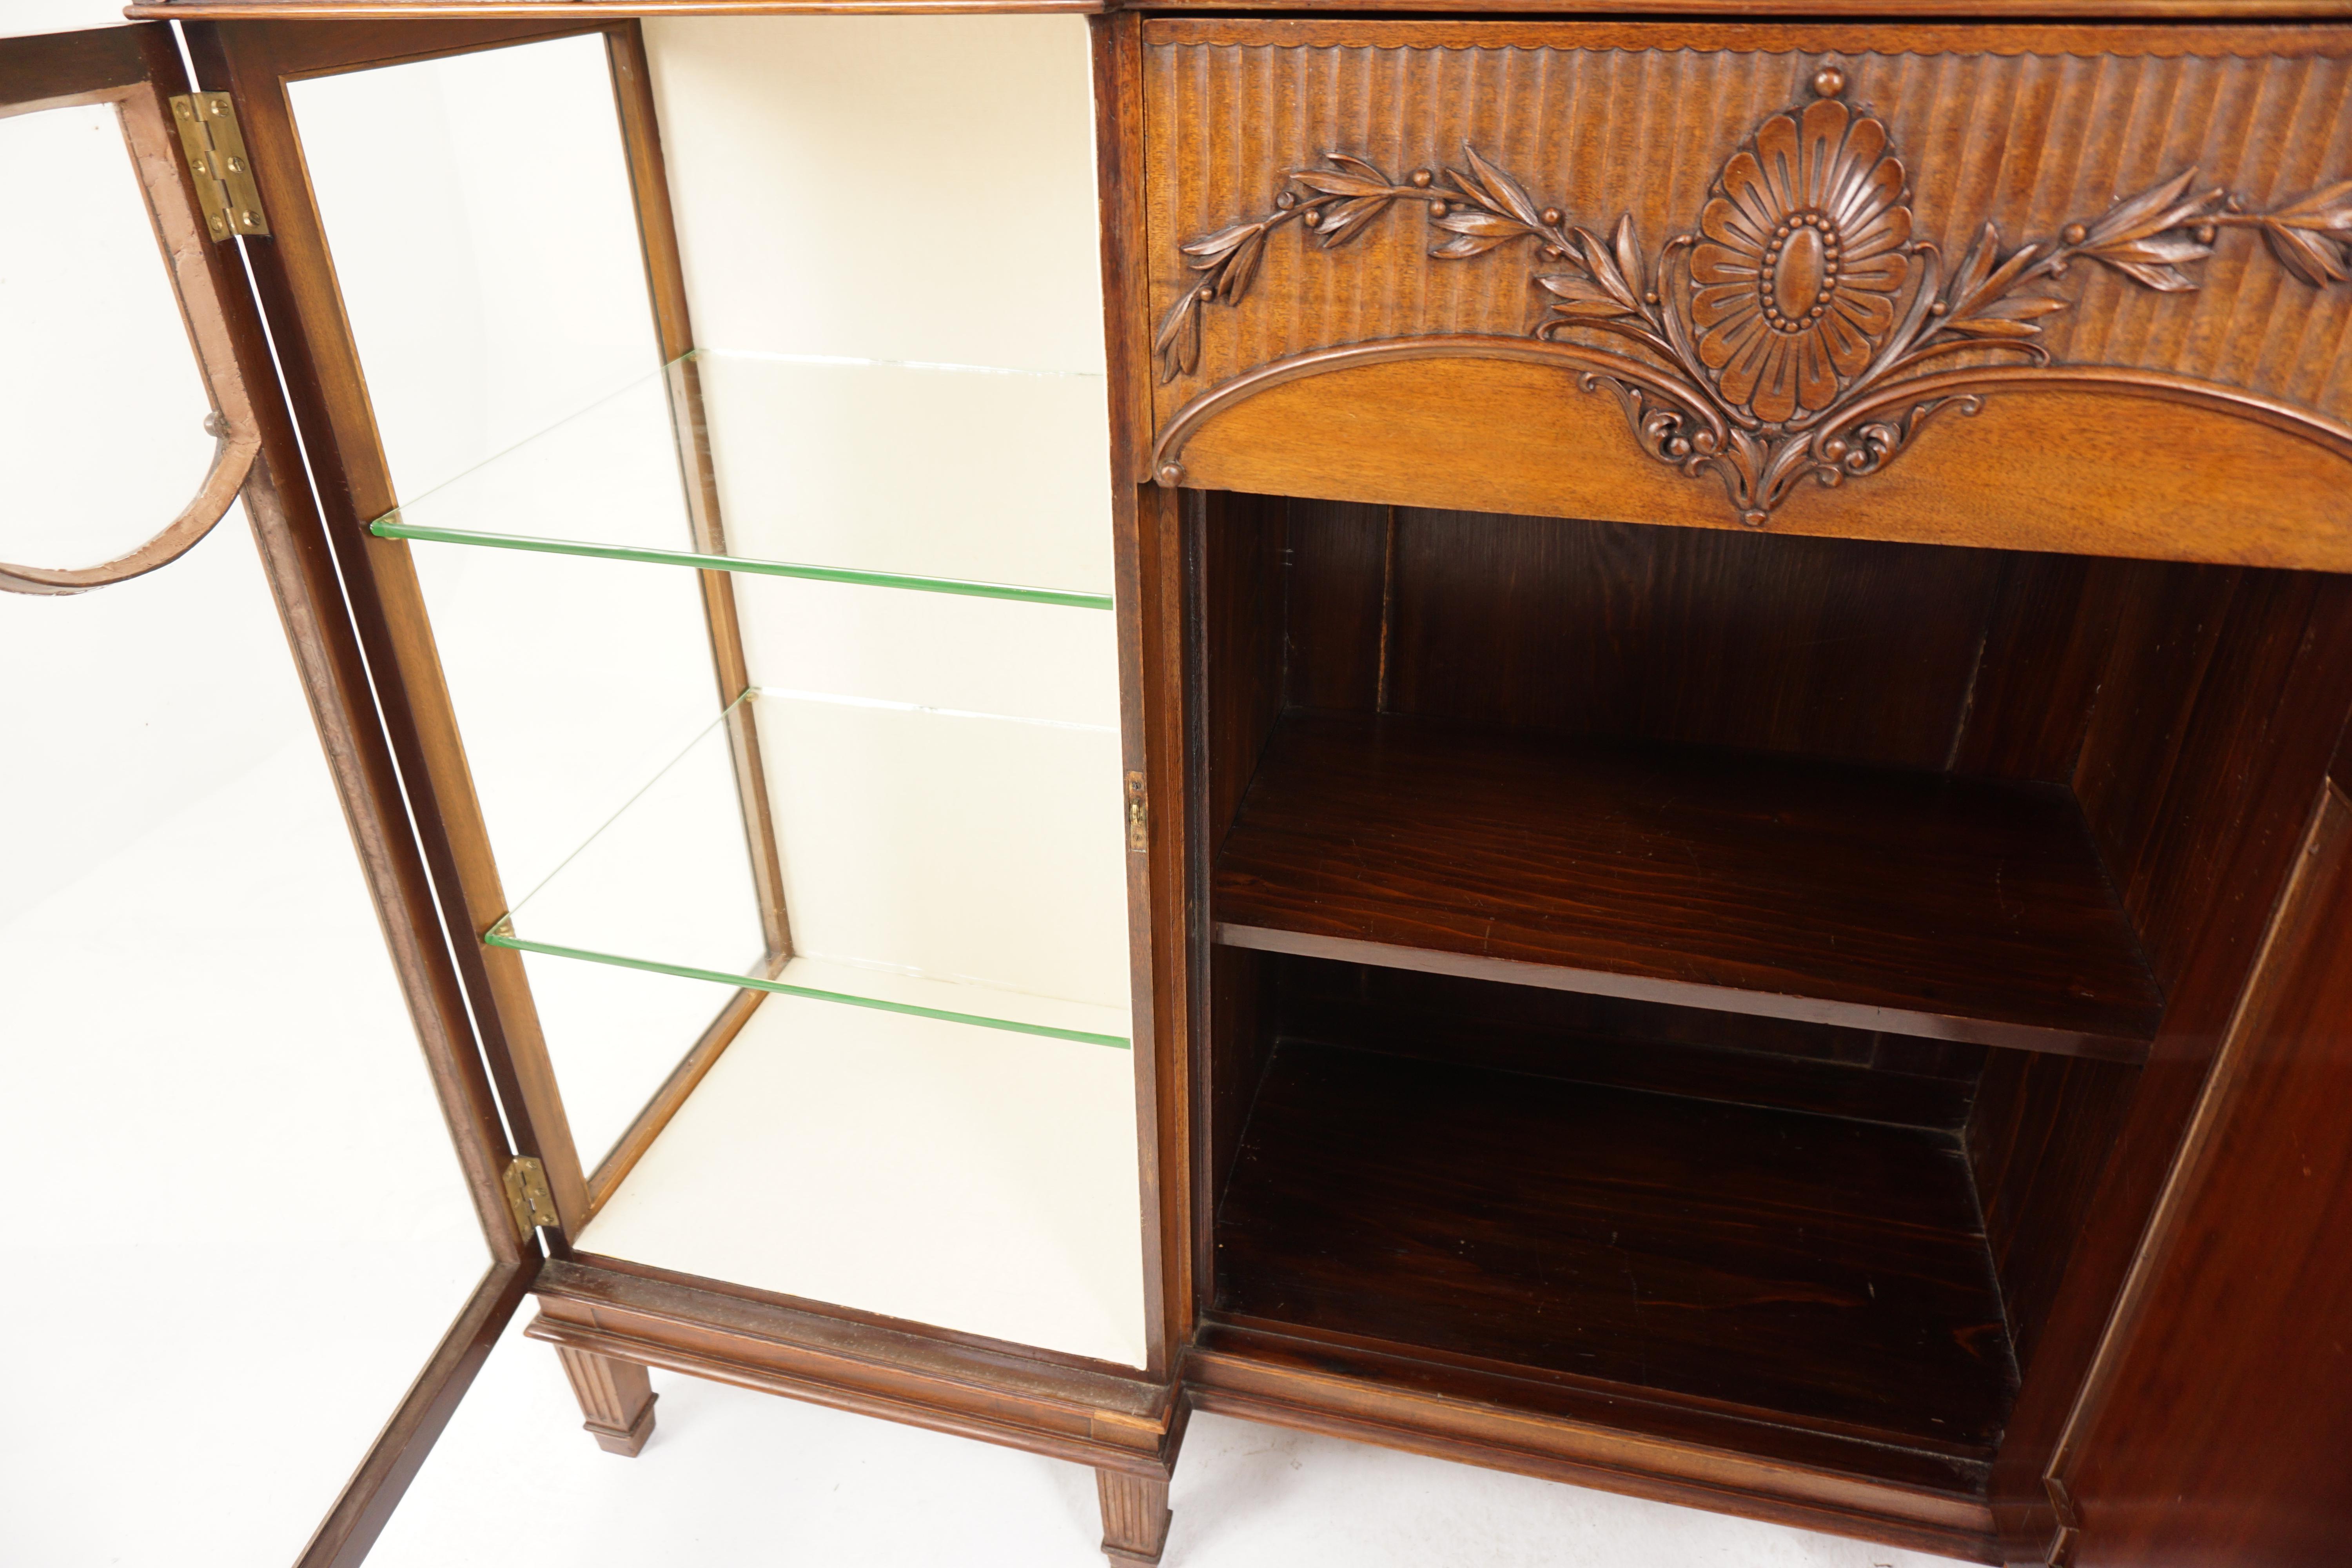 Early 20th Century Carved Walnut Display Cabinet, China Cabinet, Scotland 1900, H877